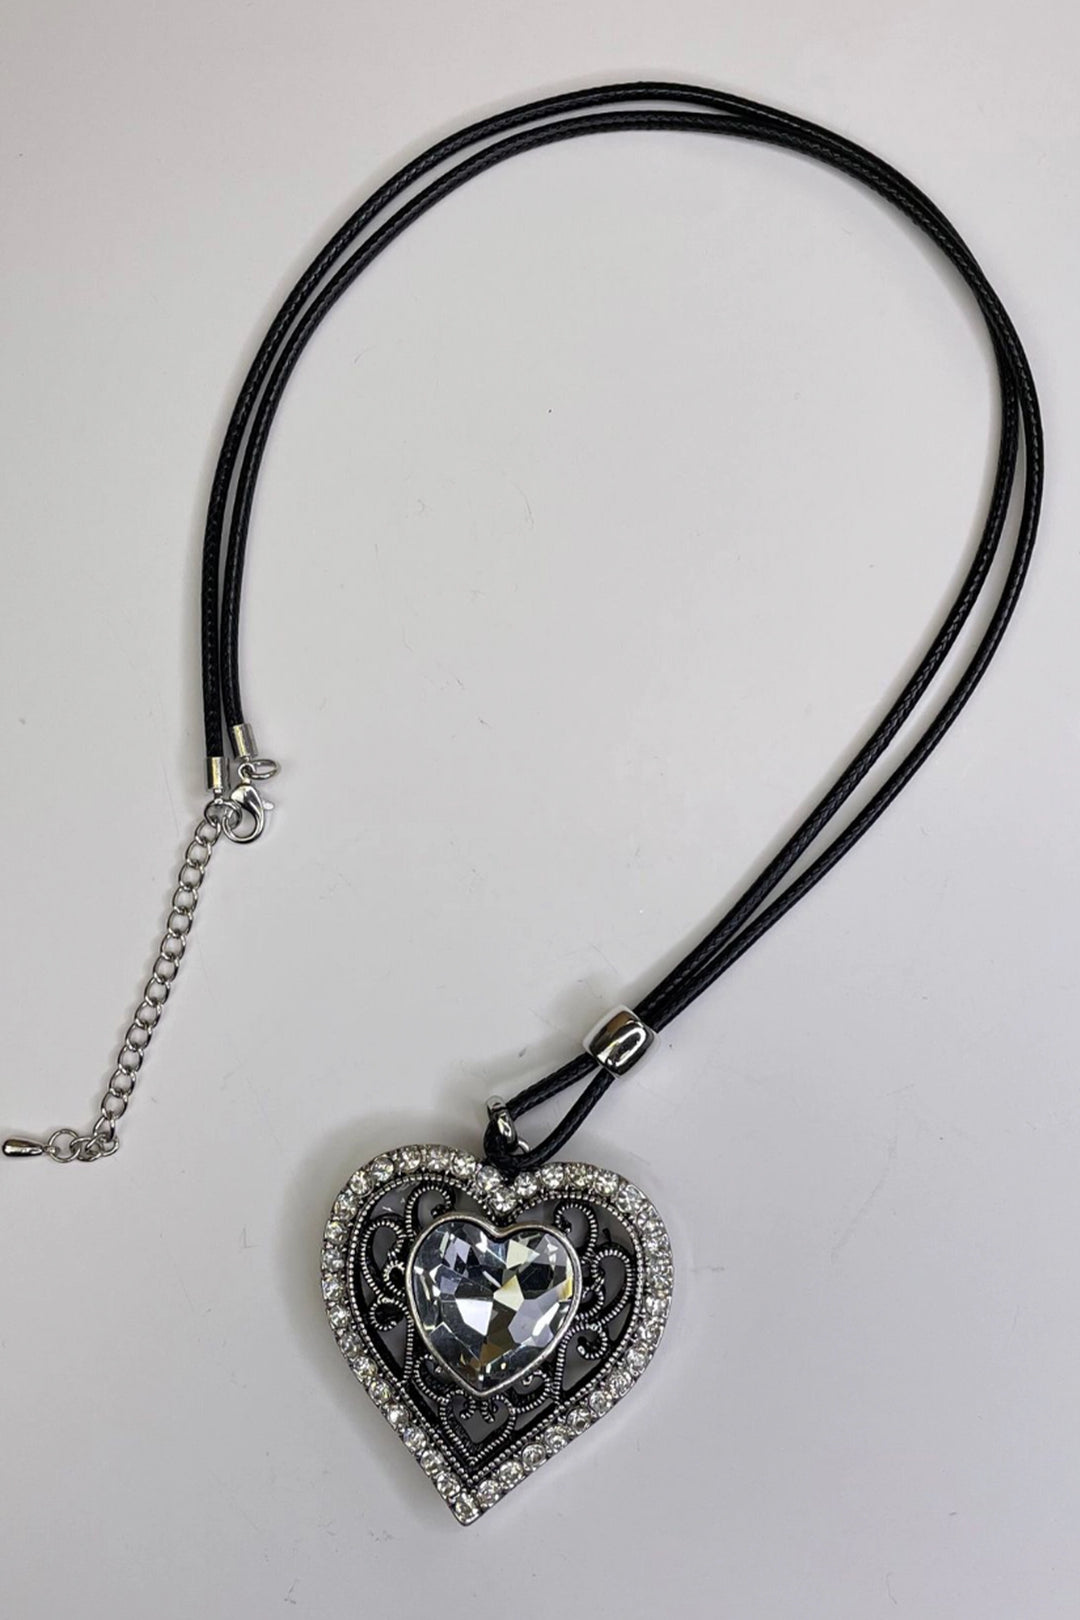 This elegant necklace features a dazzling heart-shaped rhinestone pendant with silver studs around the side.